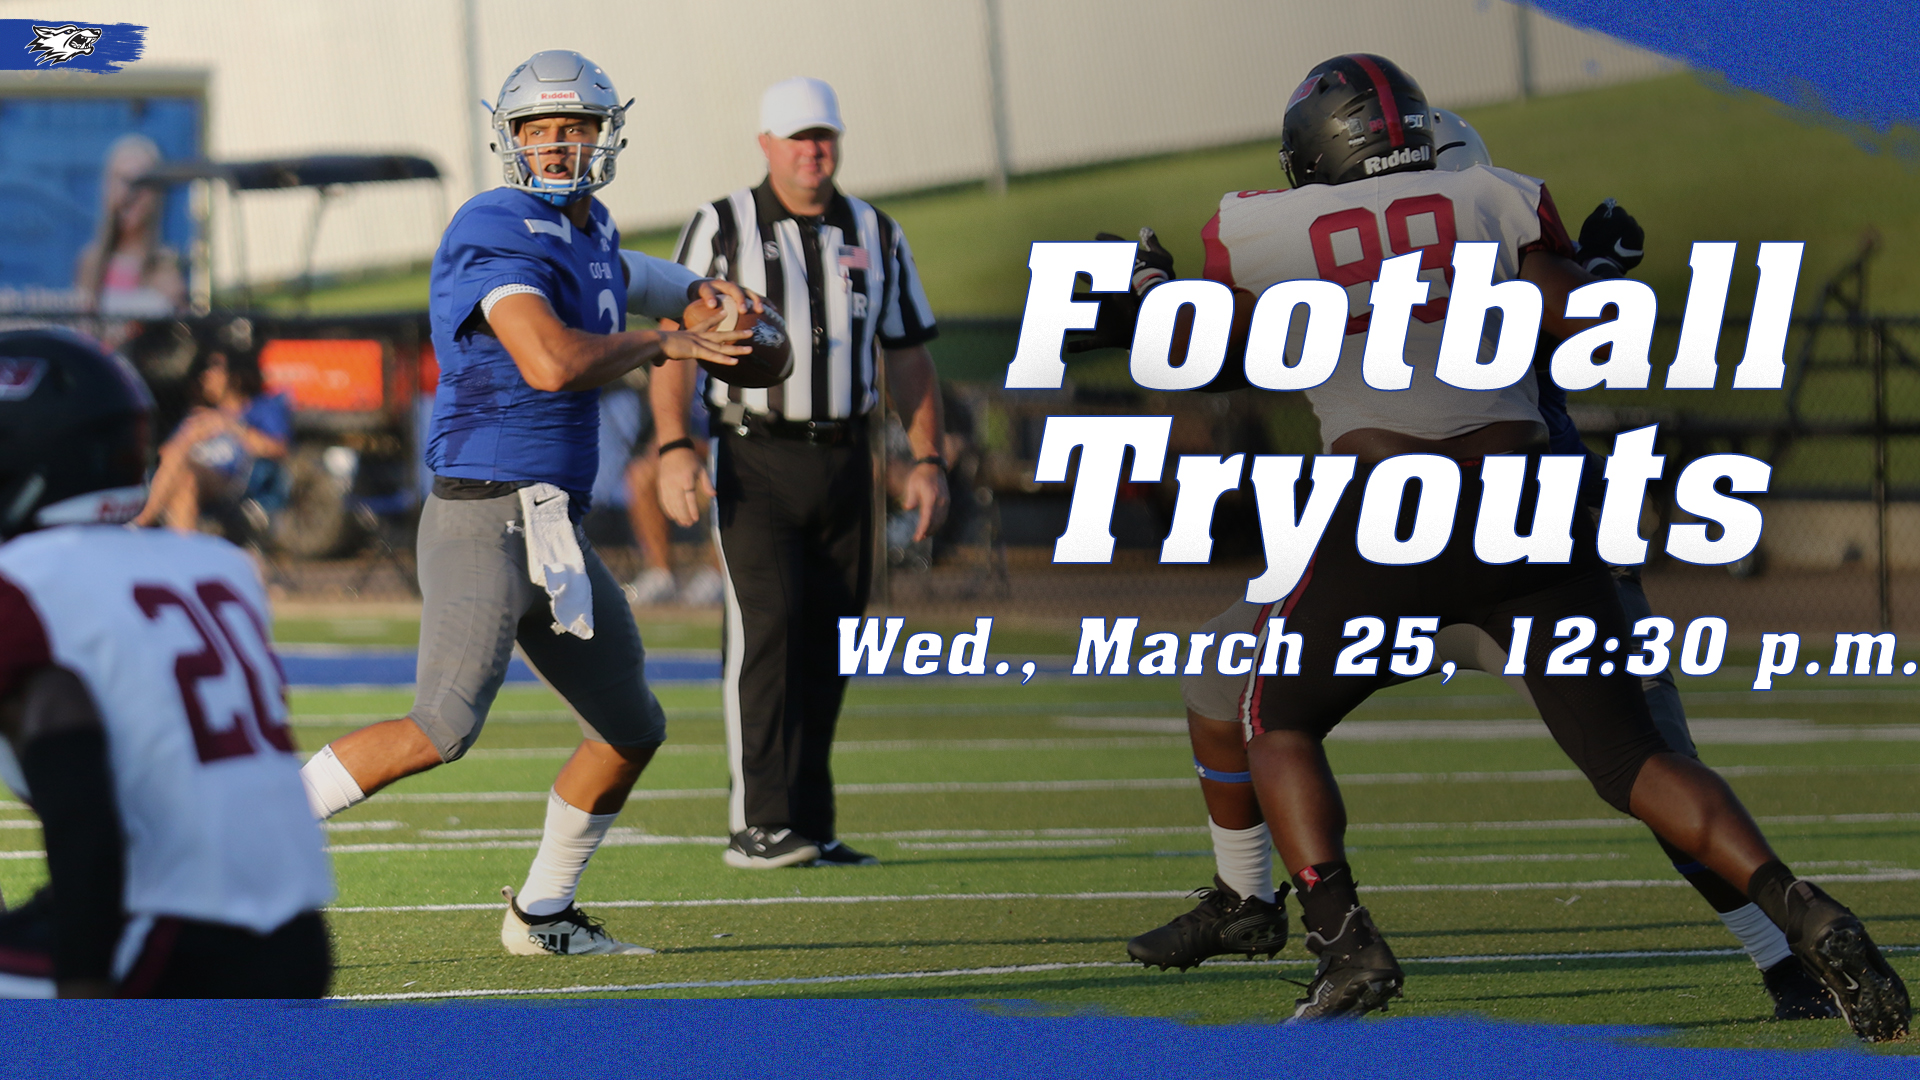 Second football tryout session scheduled